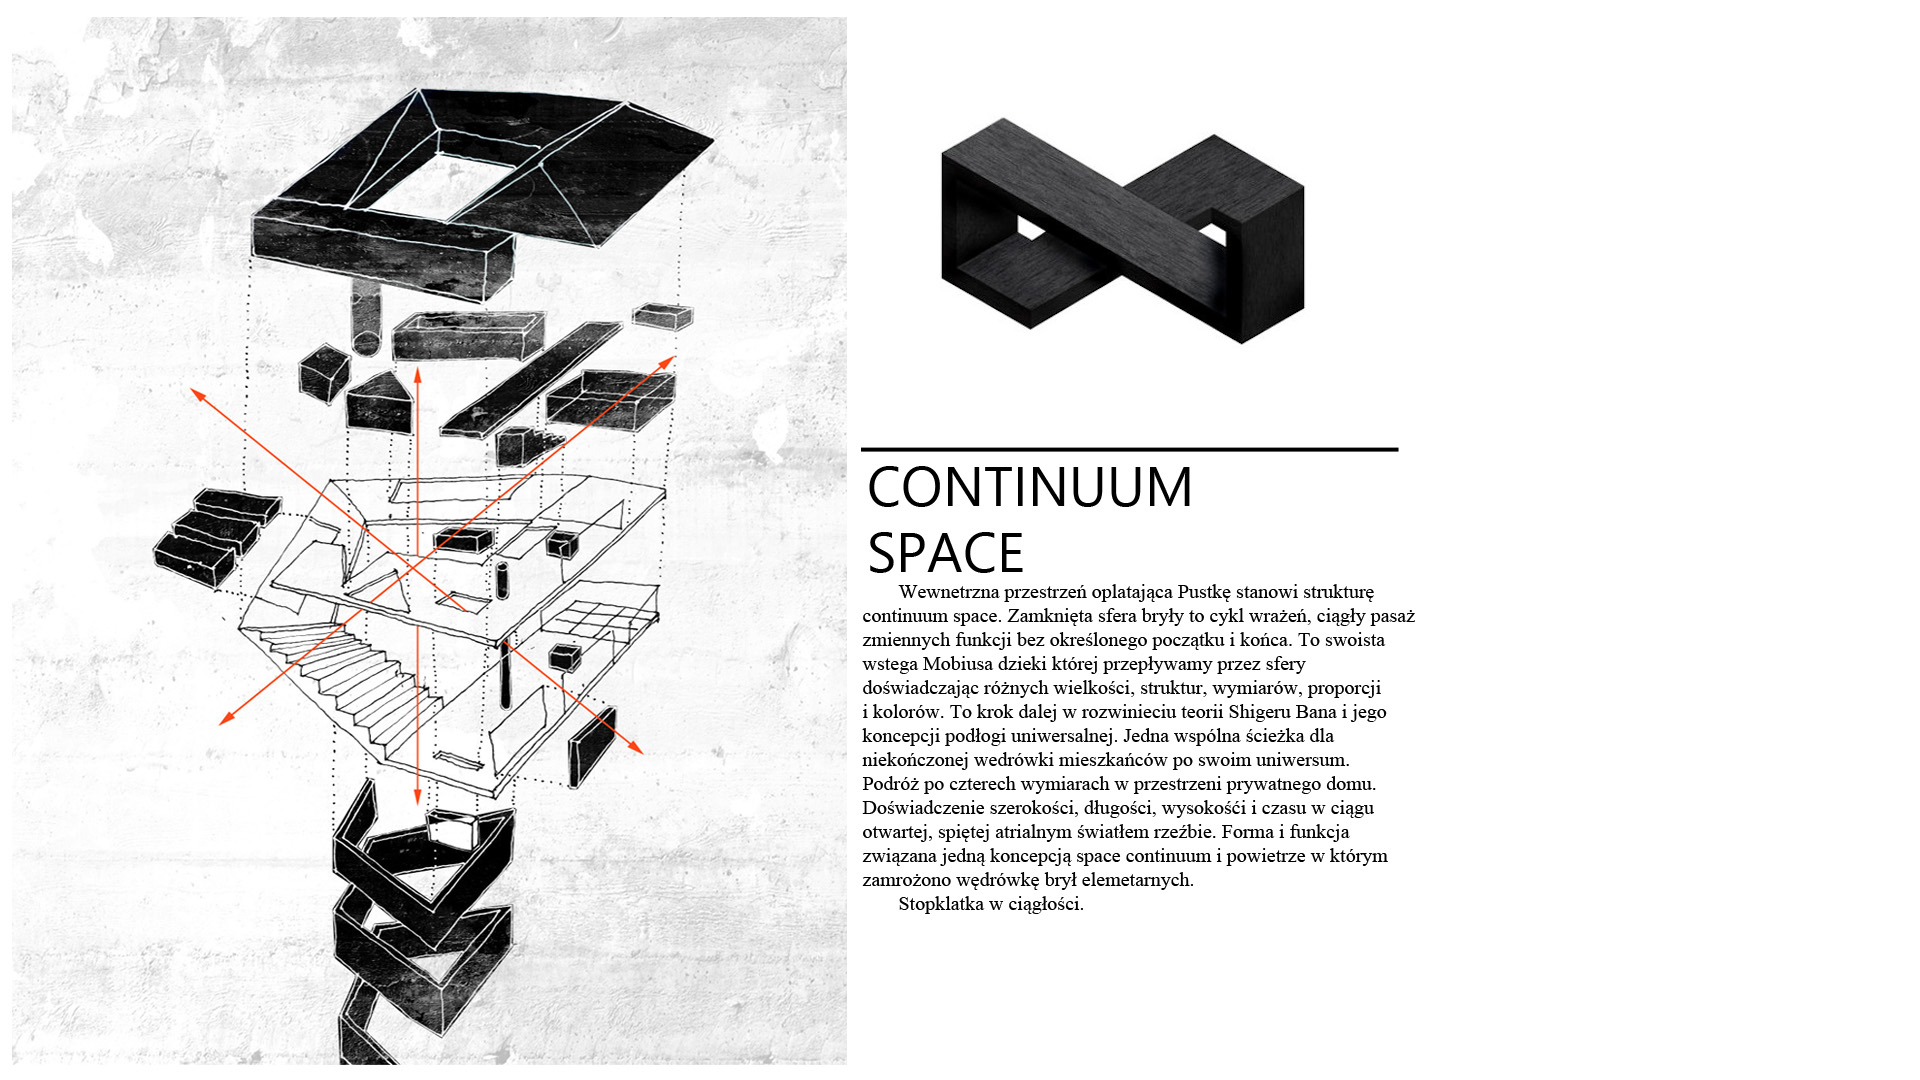 Spiral House - continuum space - opis